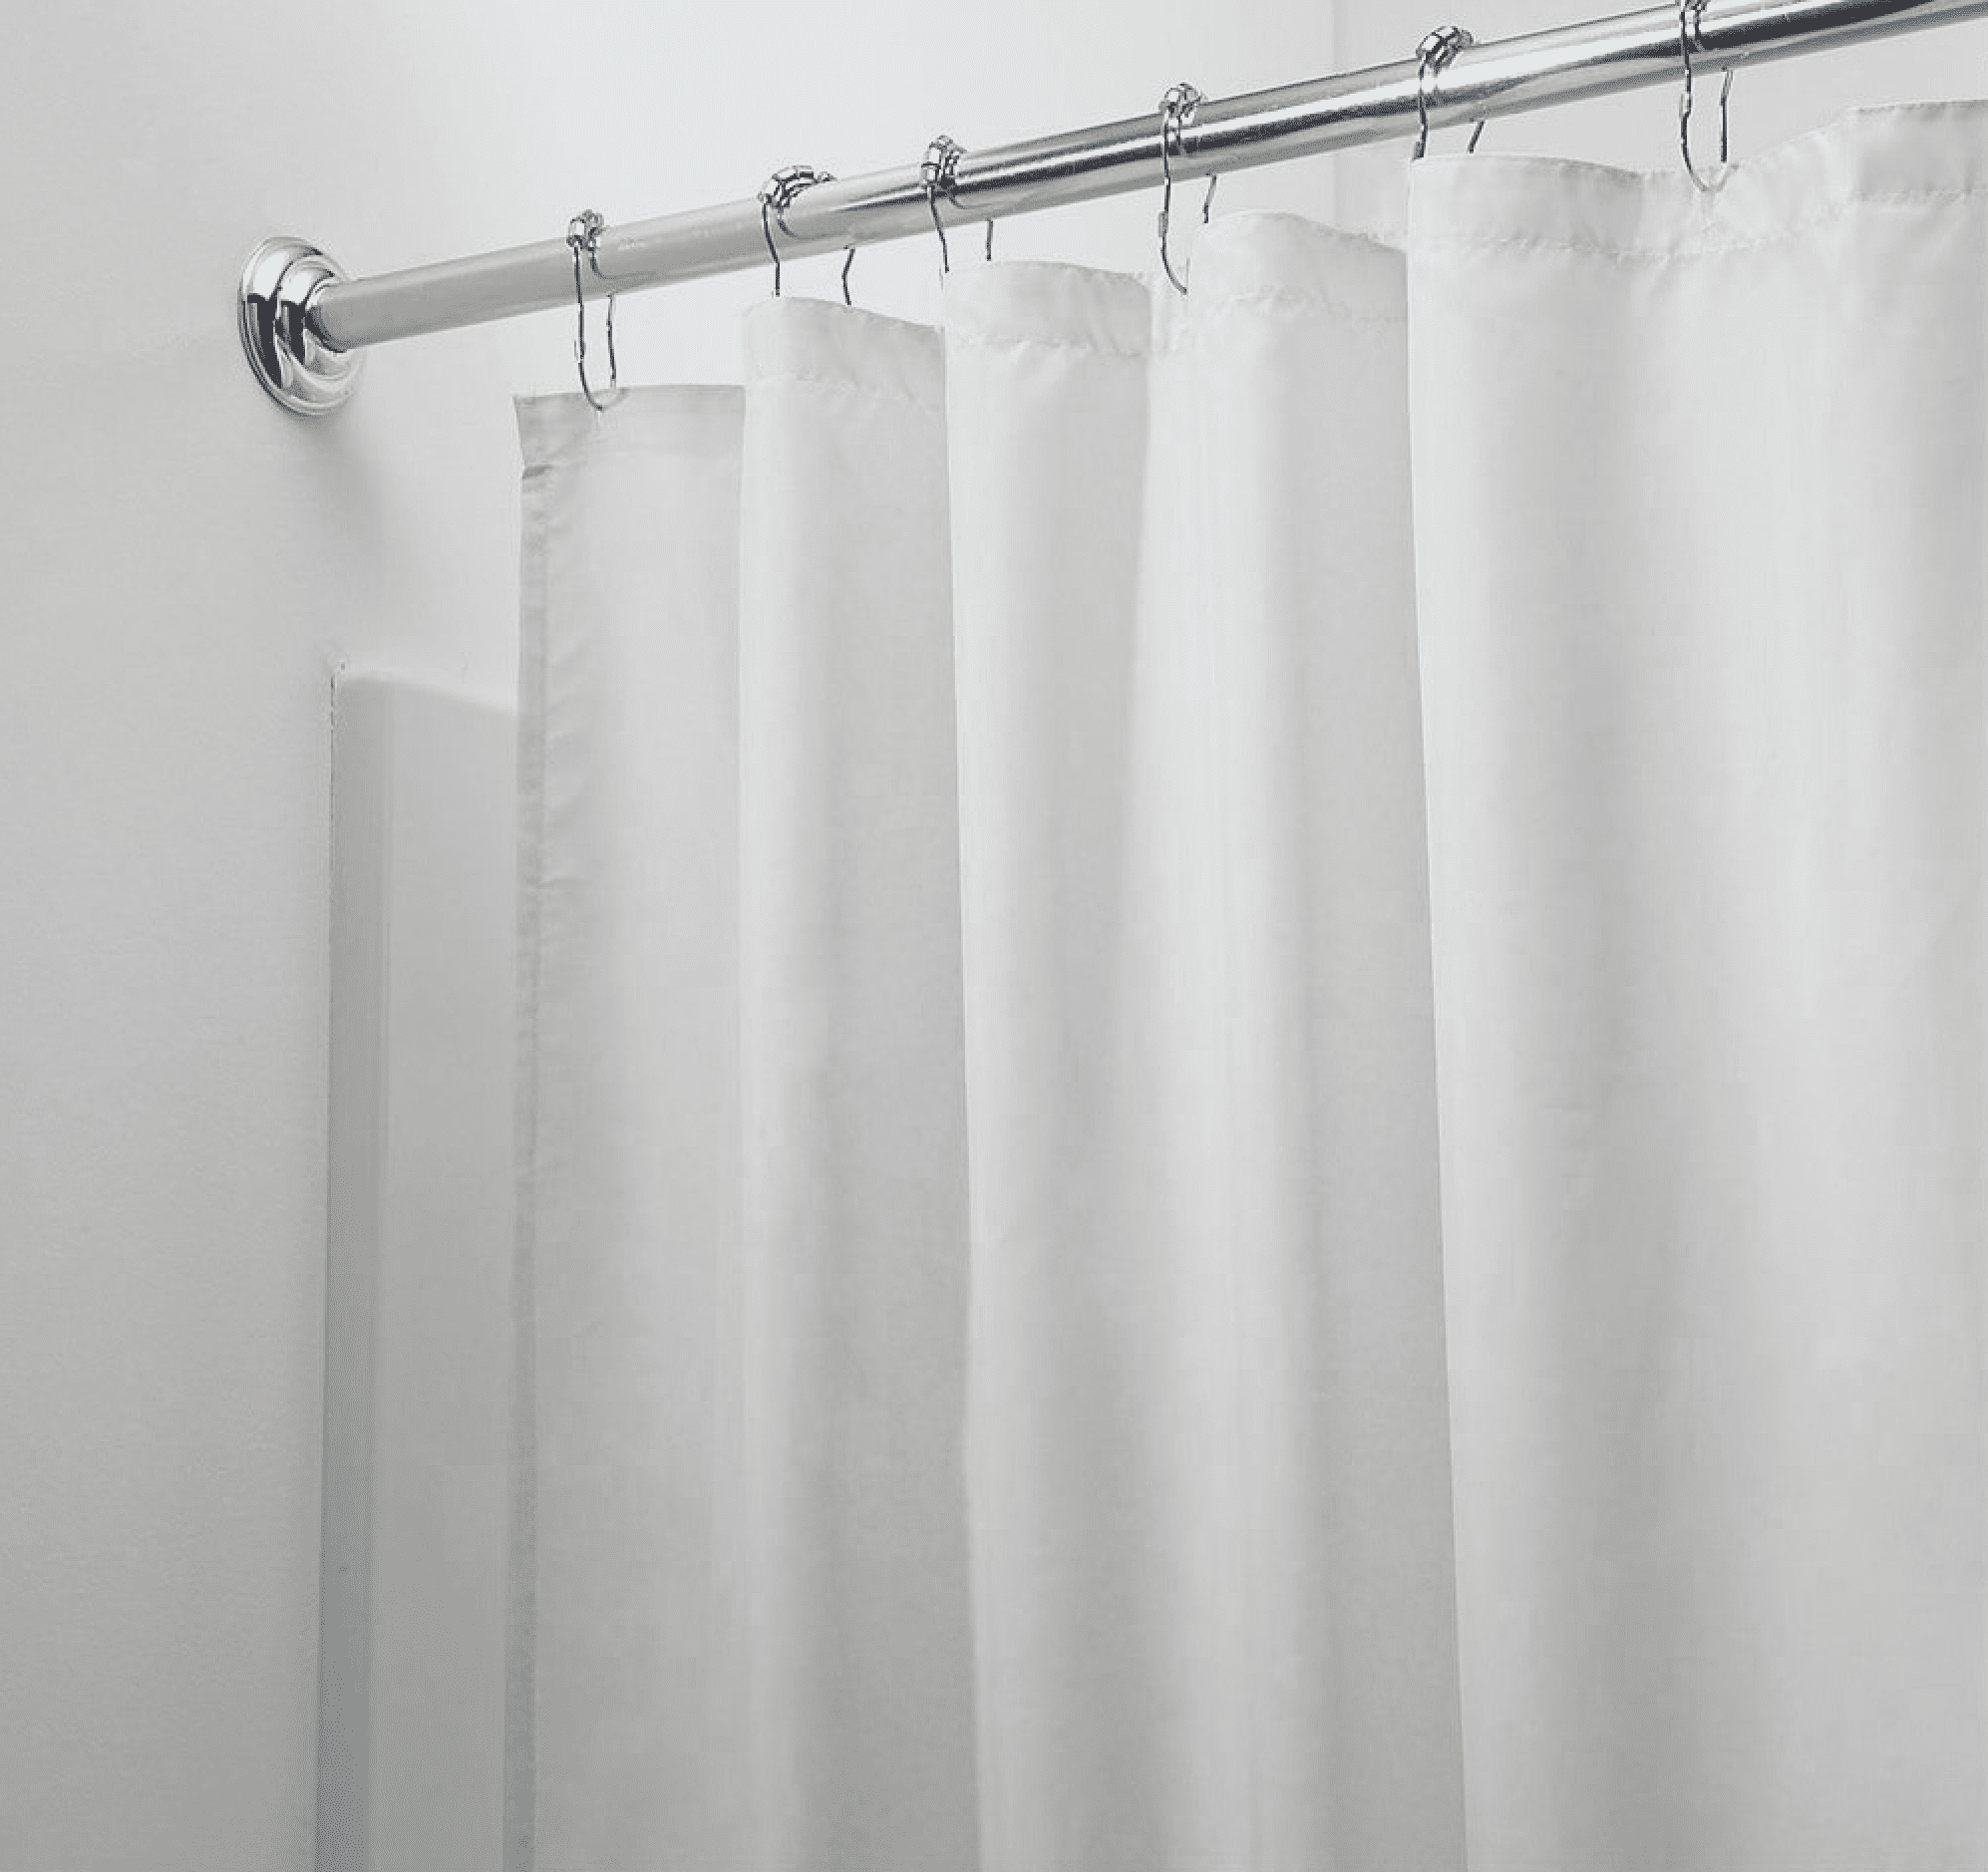 Mold Mildew Resistant Fabric Shower, Does A Fabric Shower Curtain Need Liner